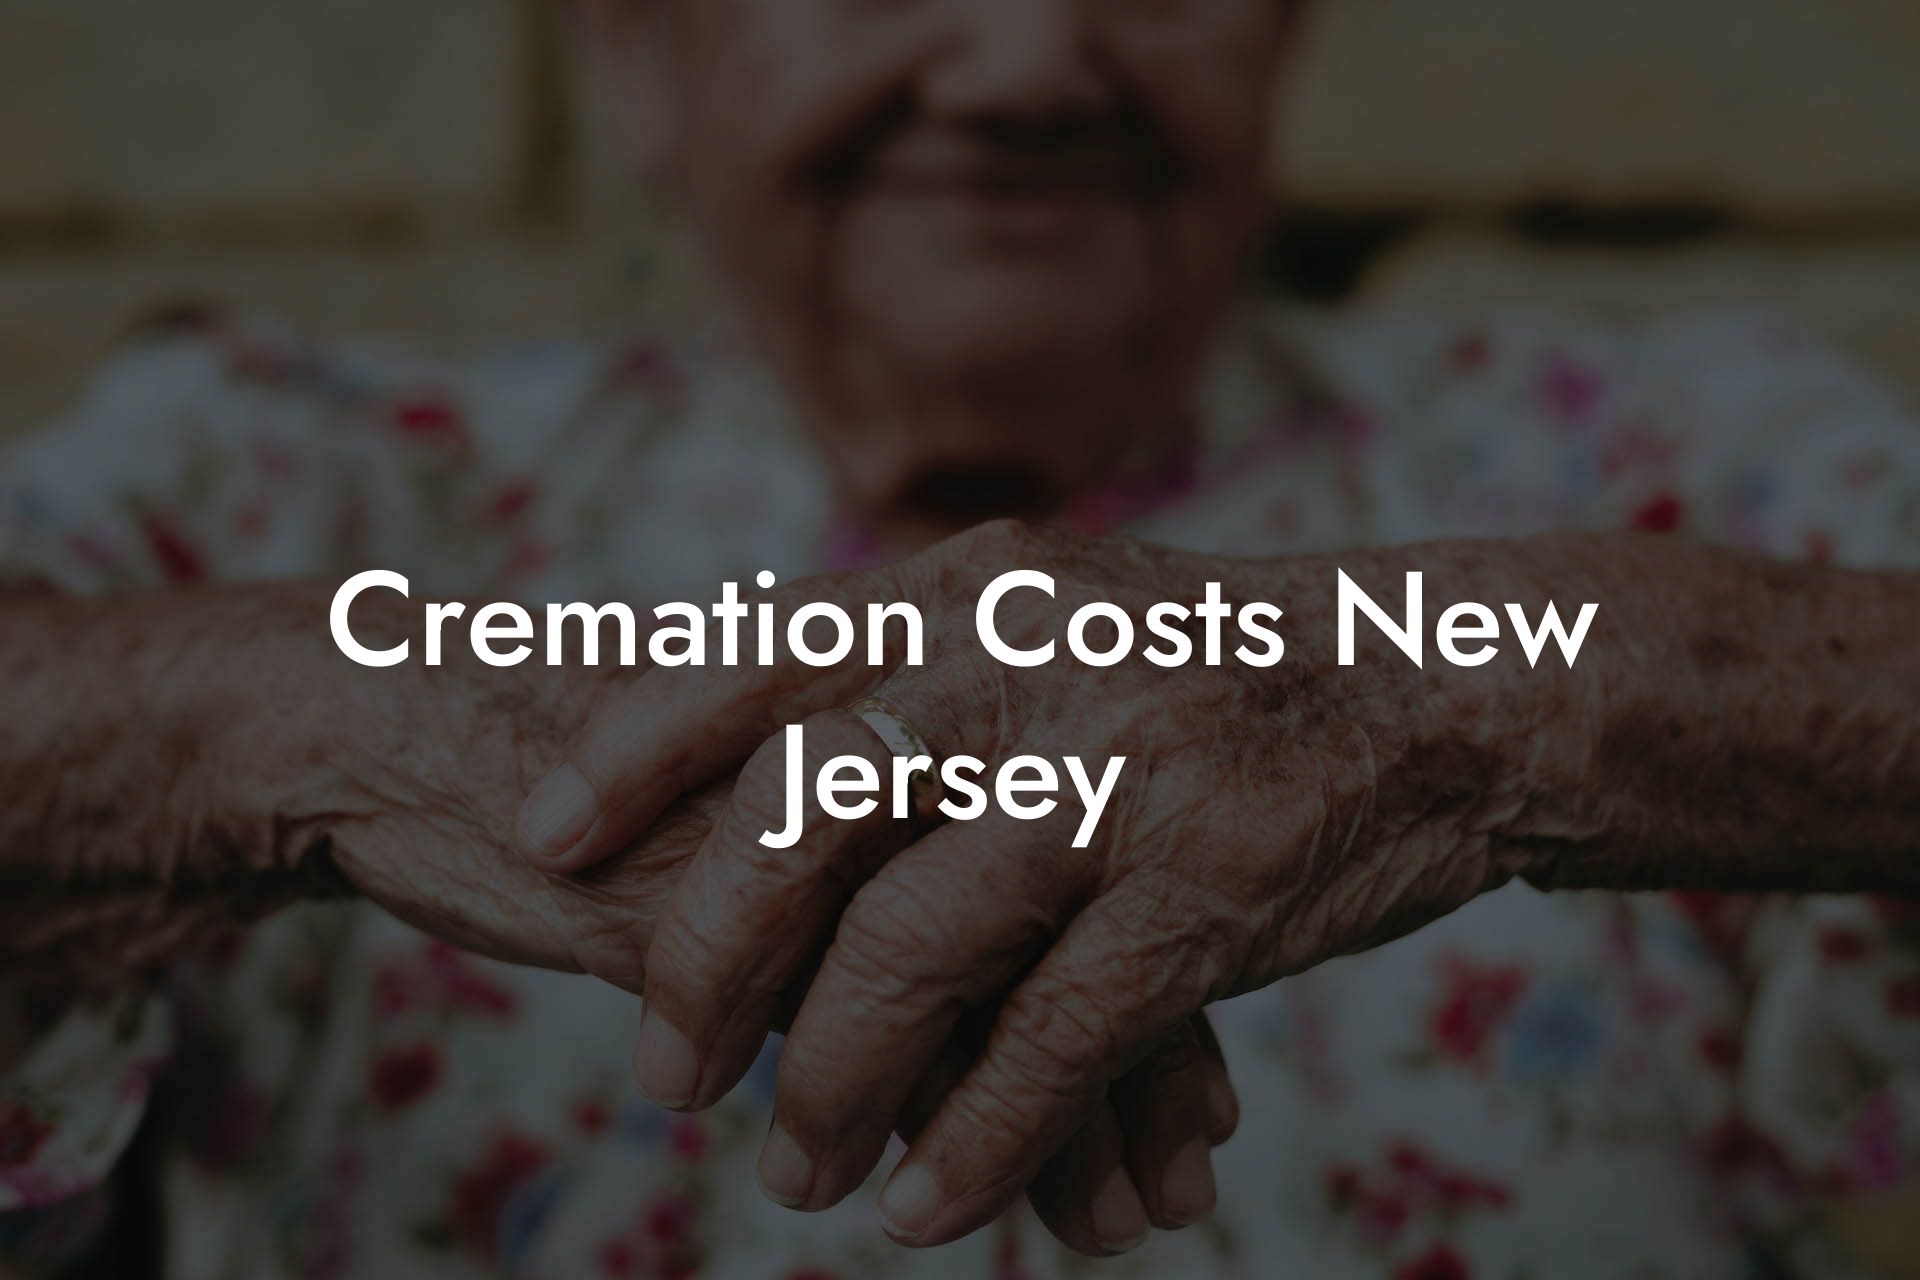 Cremation Costs New Jersey